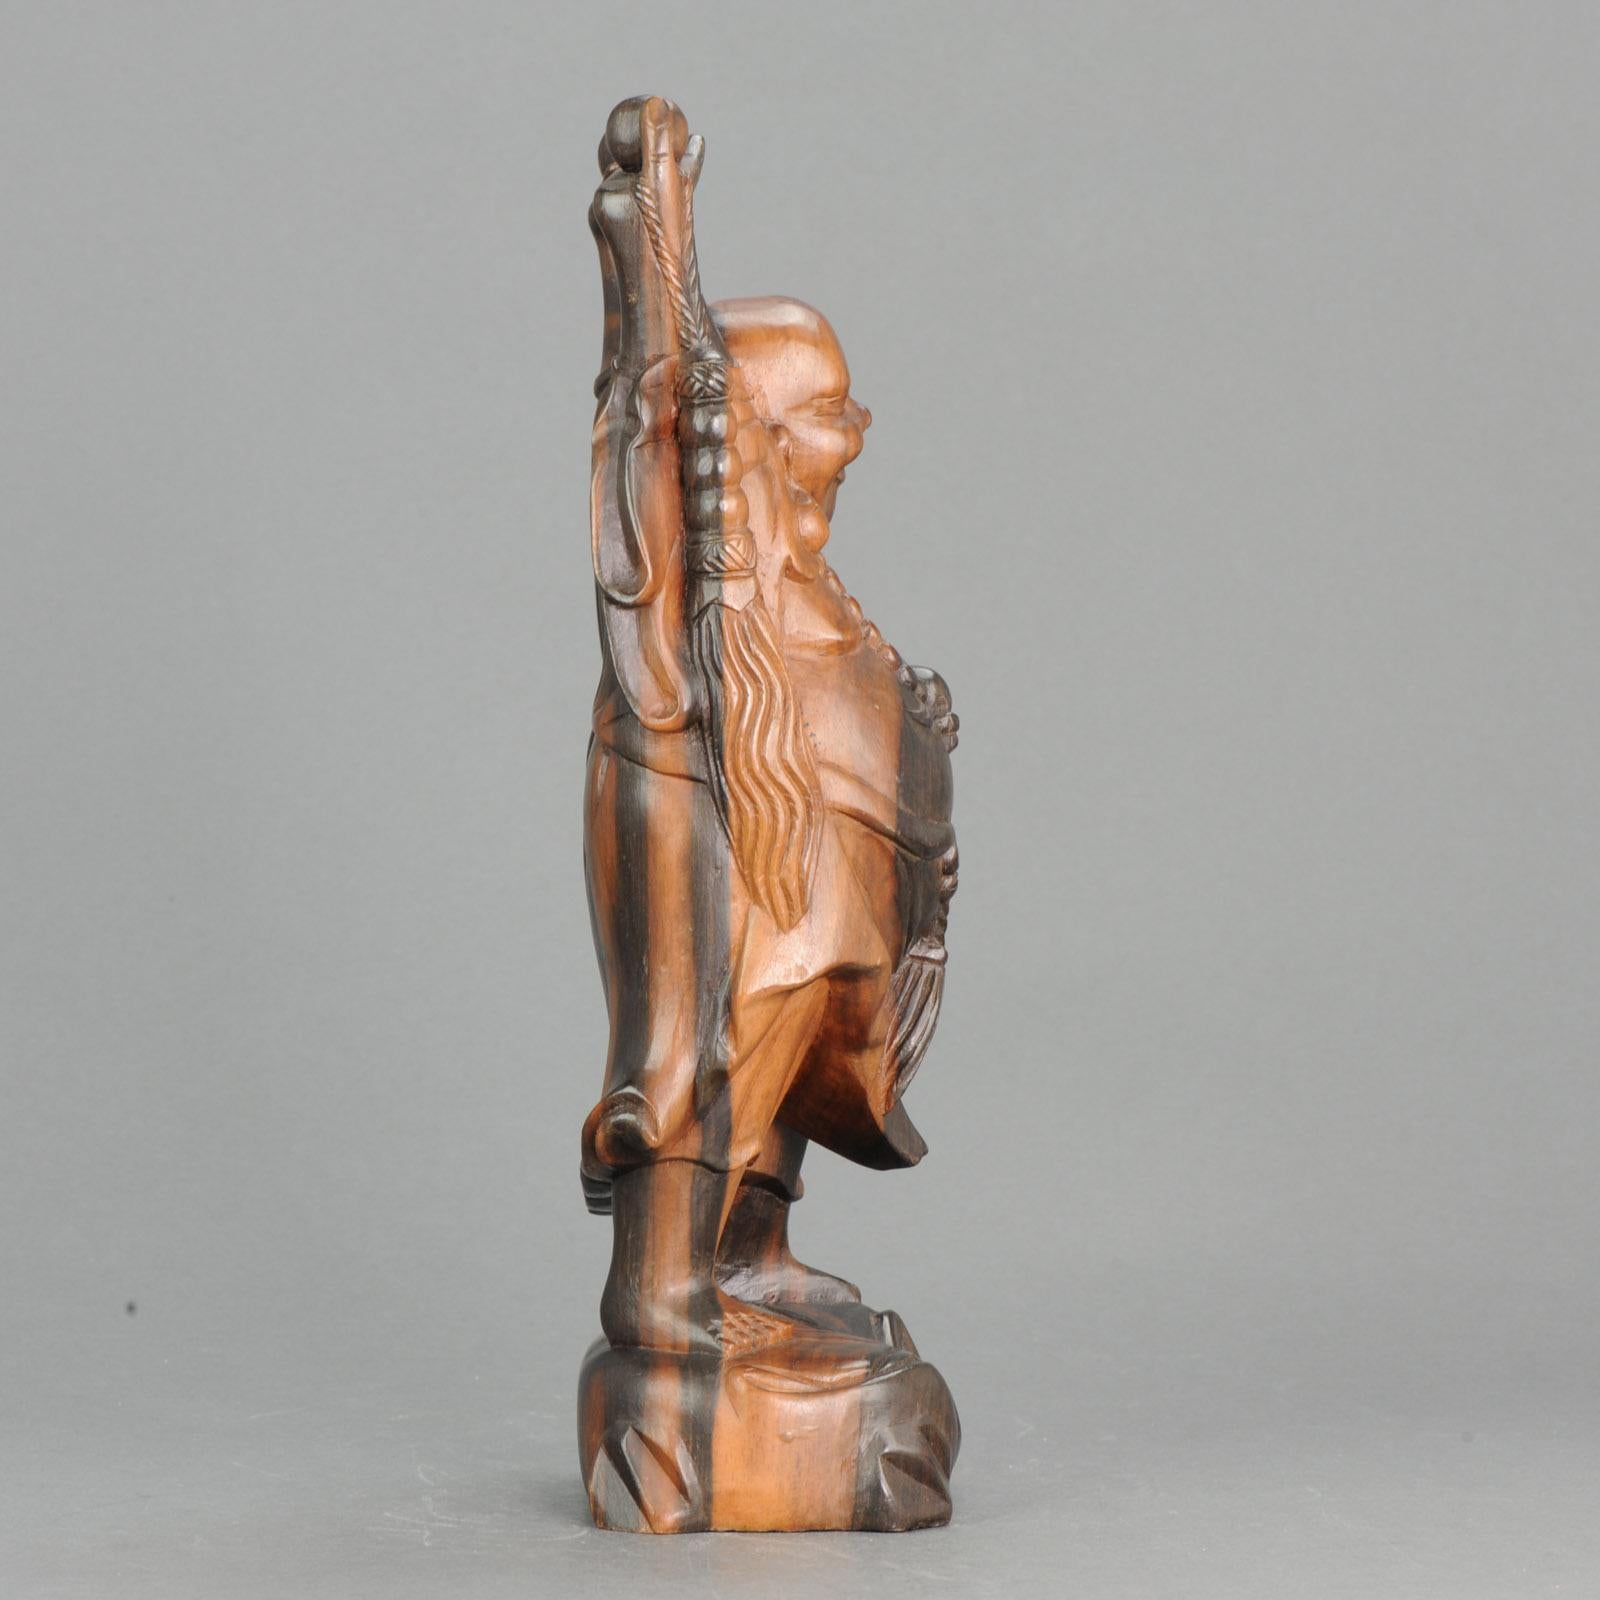 Lovely Chinese Statue. Made out of light wood.

Additional information:
Material: Wood
Type: Statues
Region of Origin: China
Period: 20th century
Condition: Overall Condition A (Very Good) minor cracks
Dimension: 31 H cm